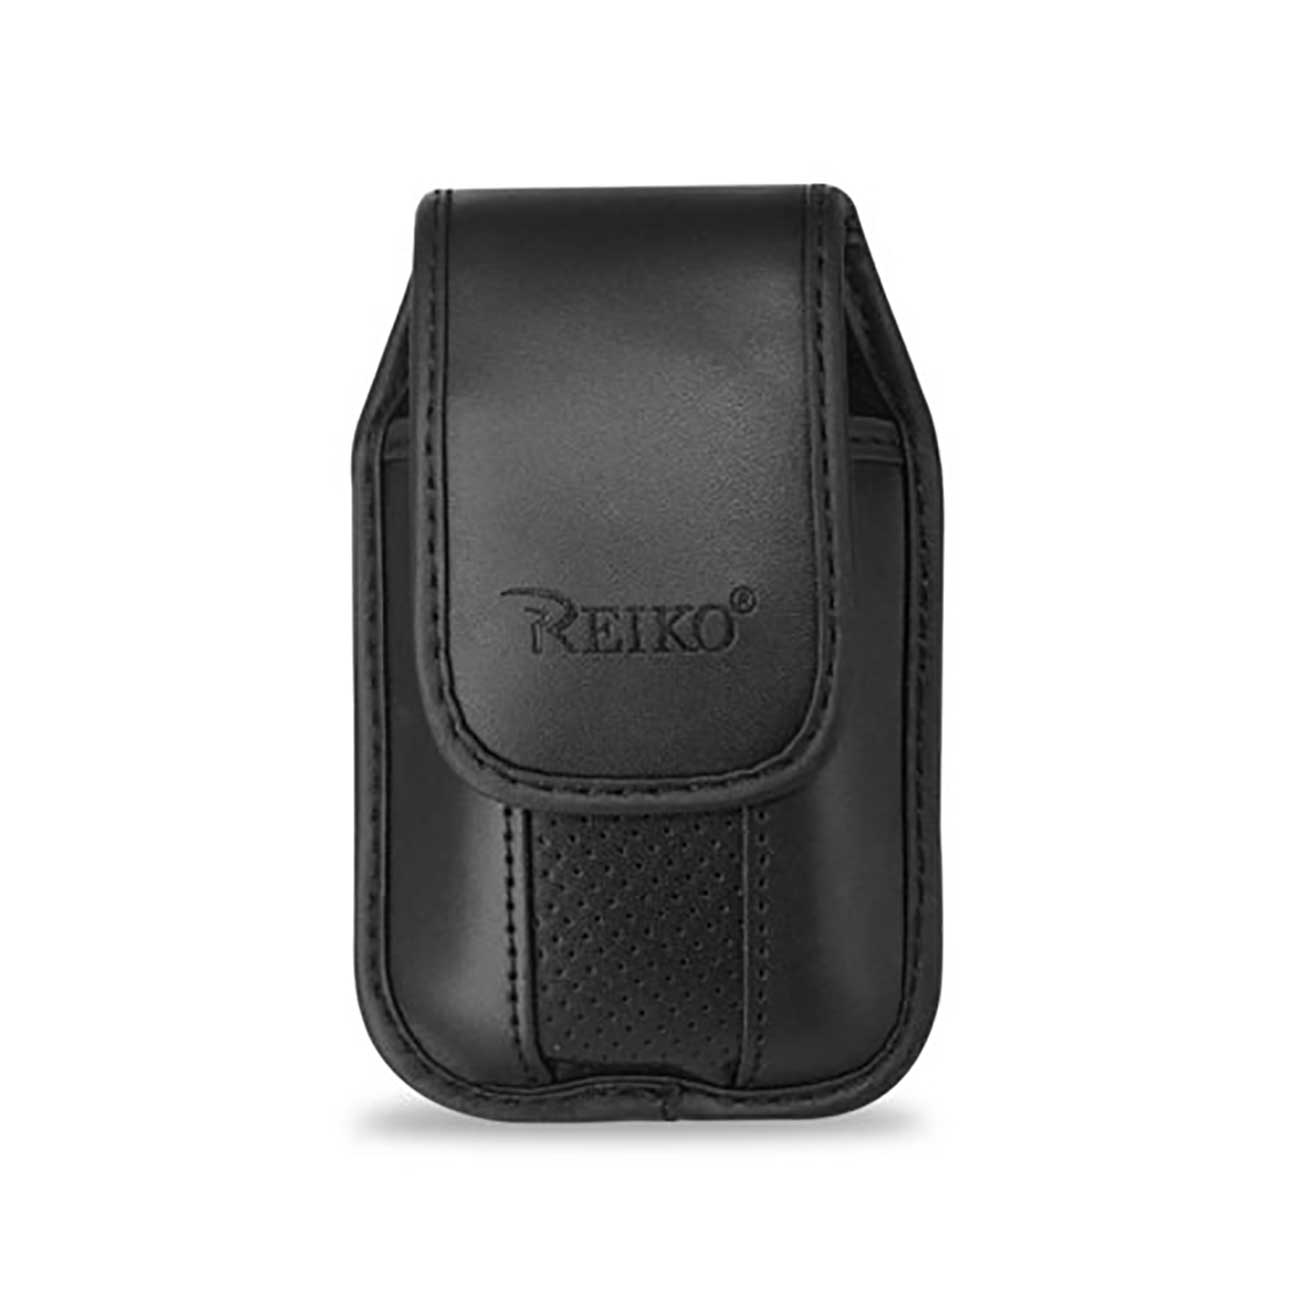 Pouch/ Phone Holster Vertical Vp11A LG Rumor LX260 4.3X2X0.7 Inches Black Color